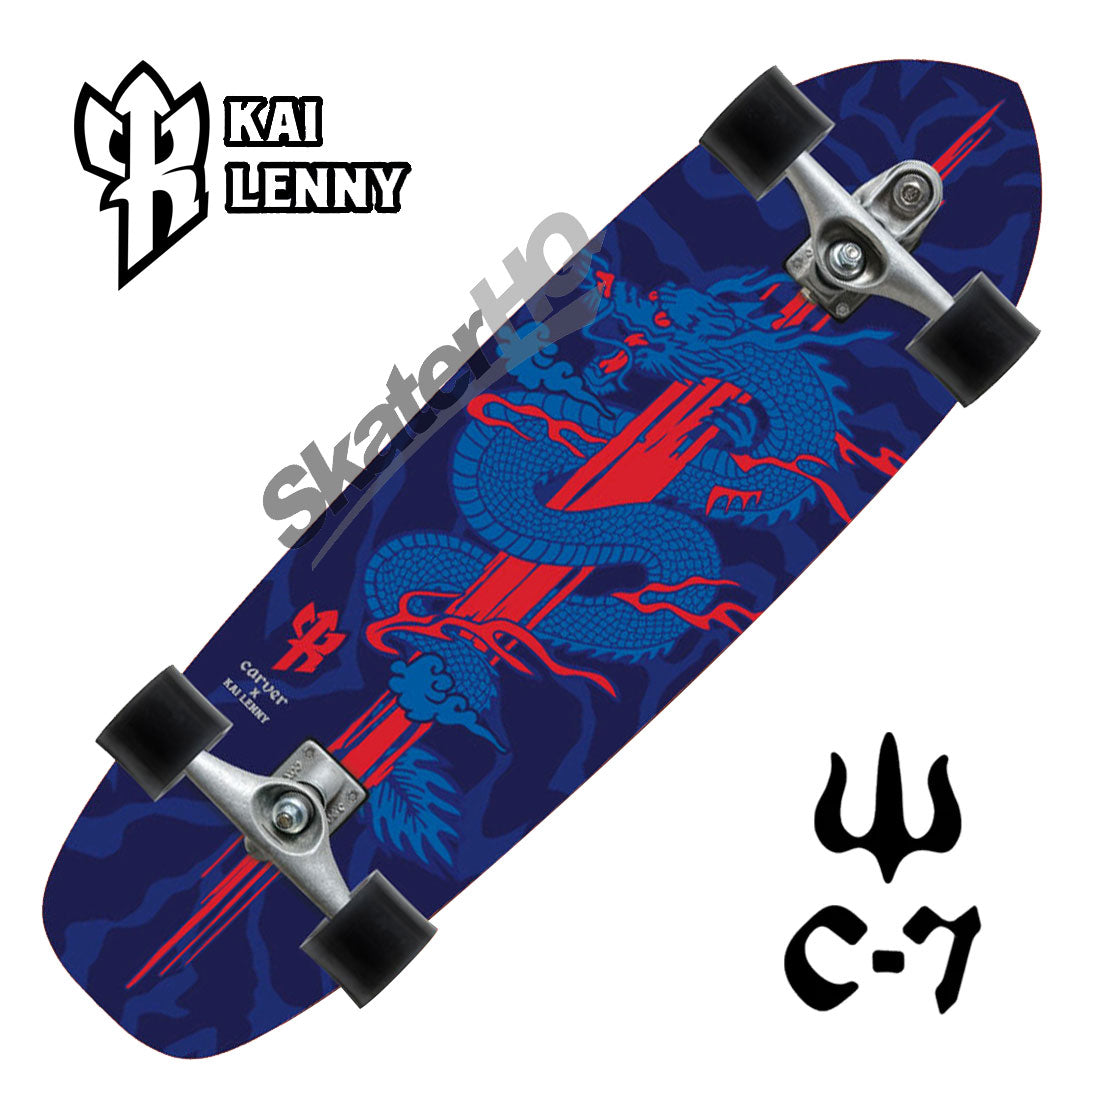 Carver x Kai Lenny Dragon 34 C7 Raw Complete Skateboard Compl Carving and Specialty